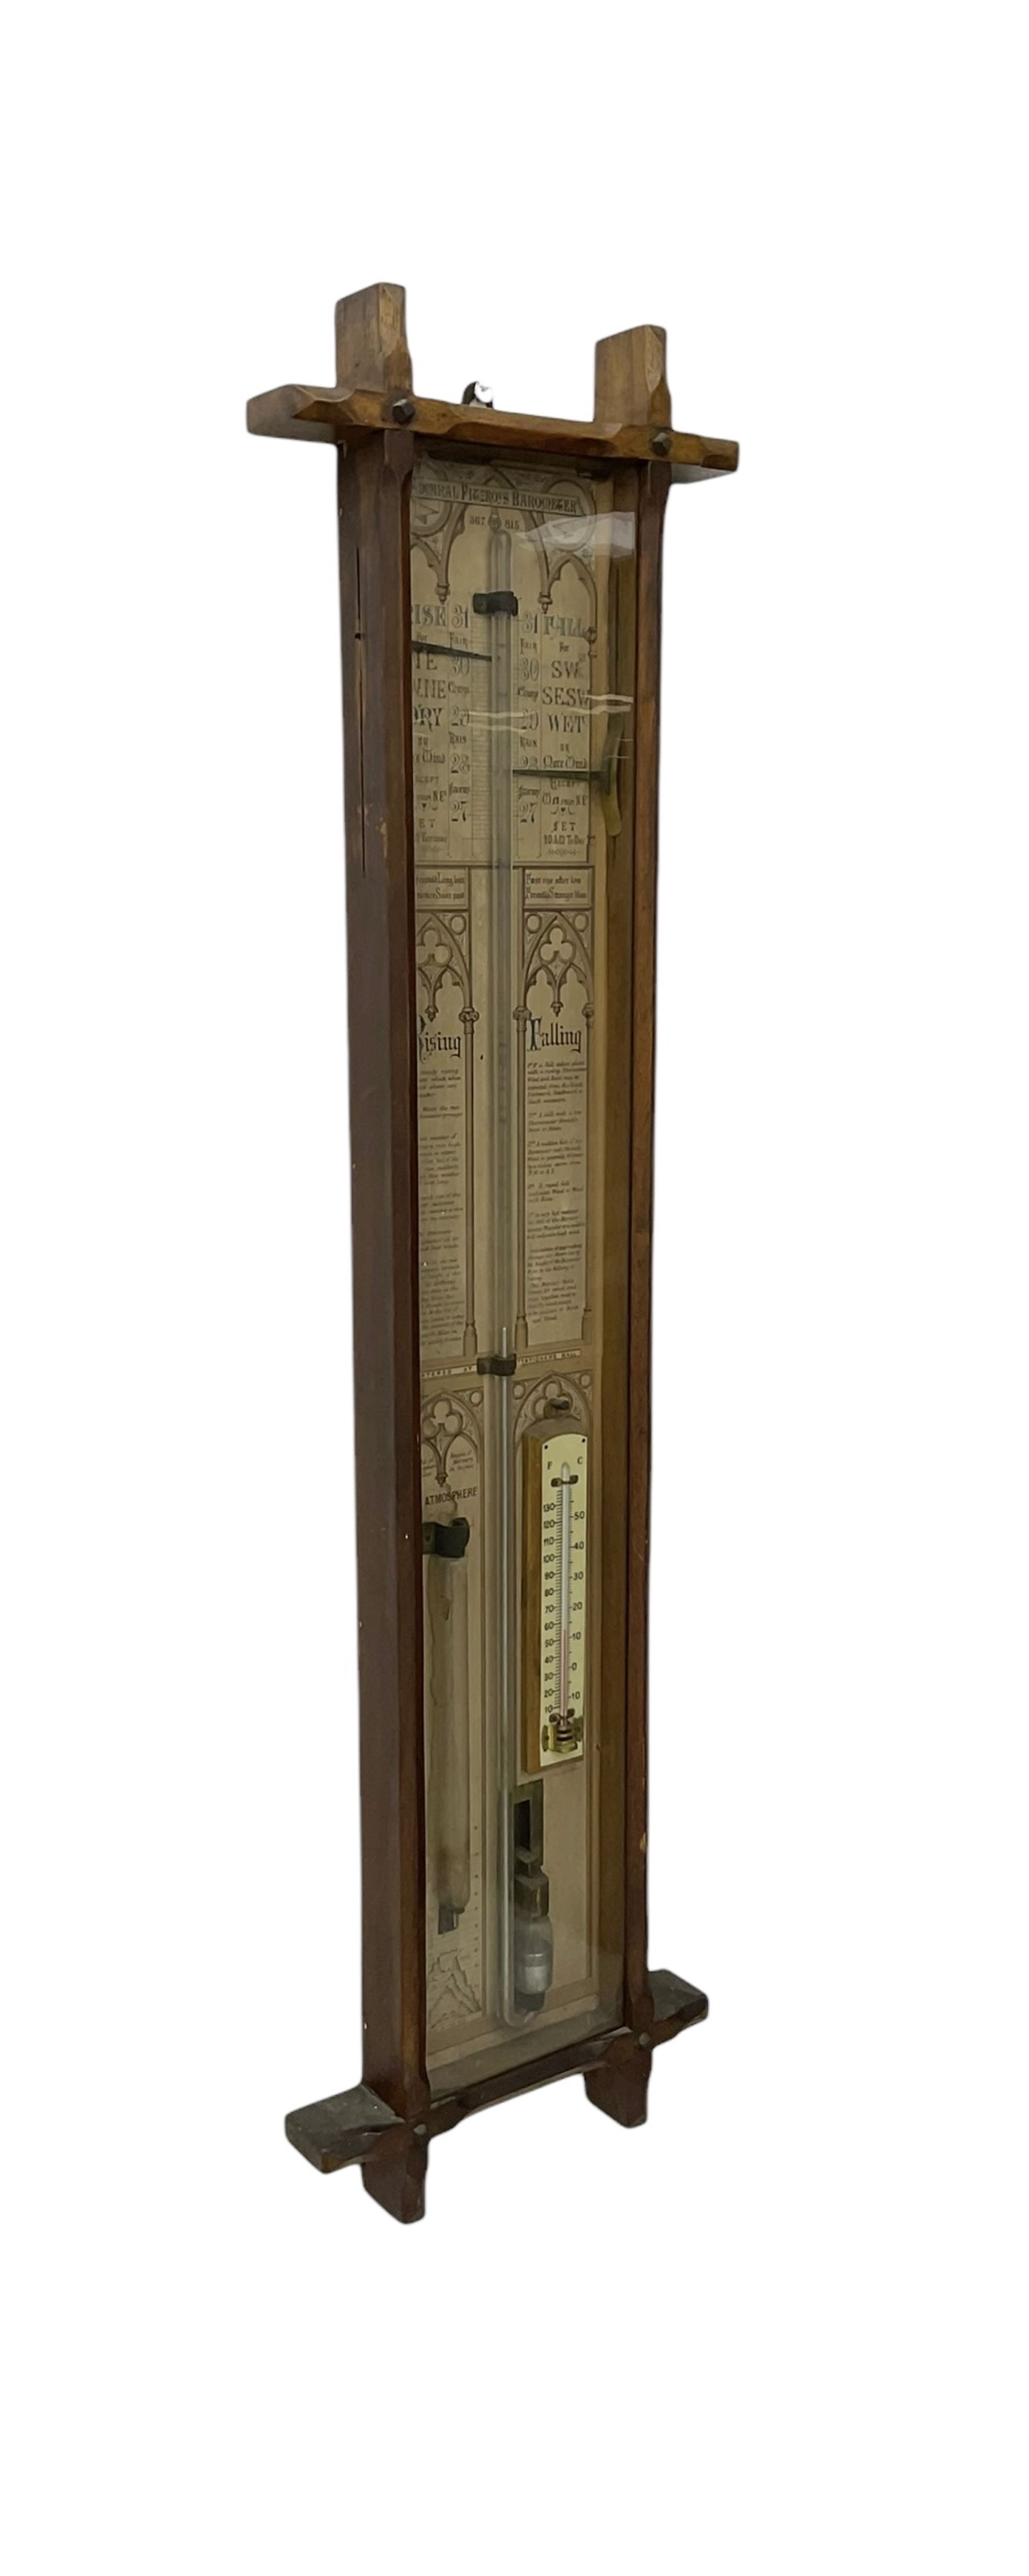 Oak cased Admiral Fitzroy barometer c1890 - with original full height paper scales annotated with Fi - Image 5 of 6